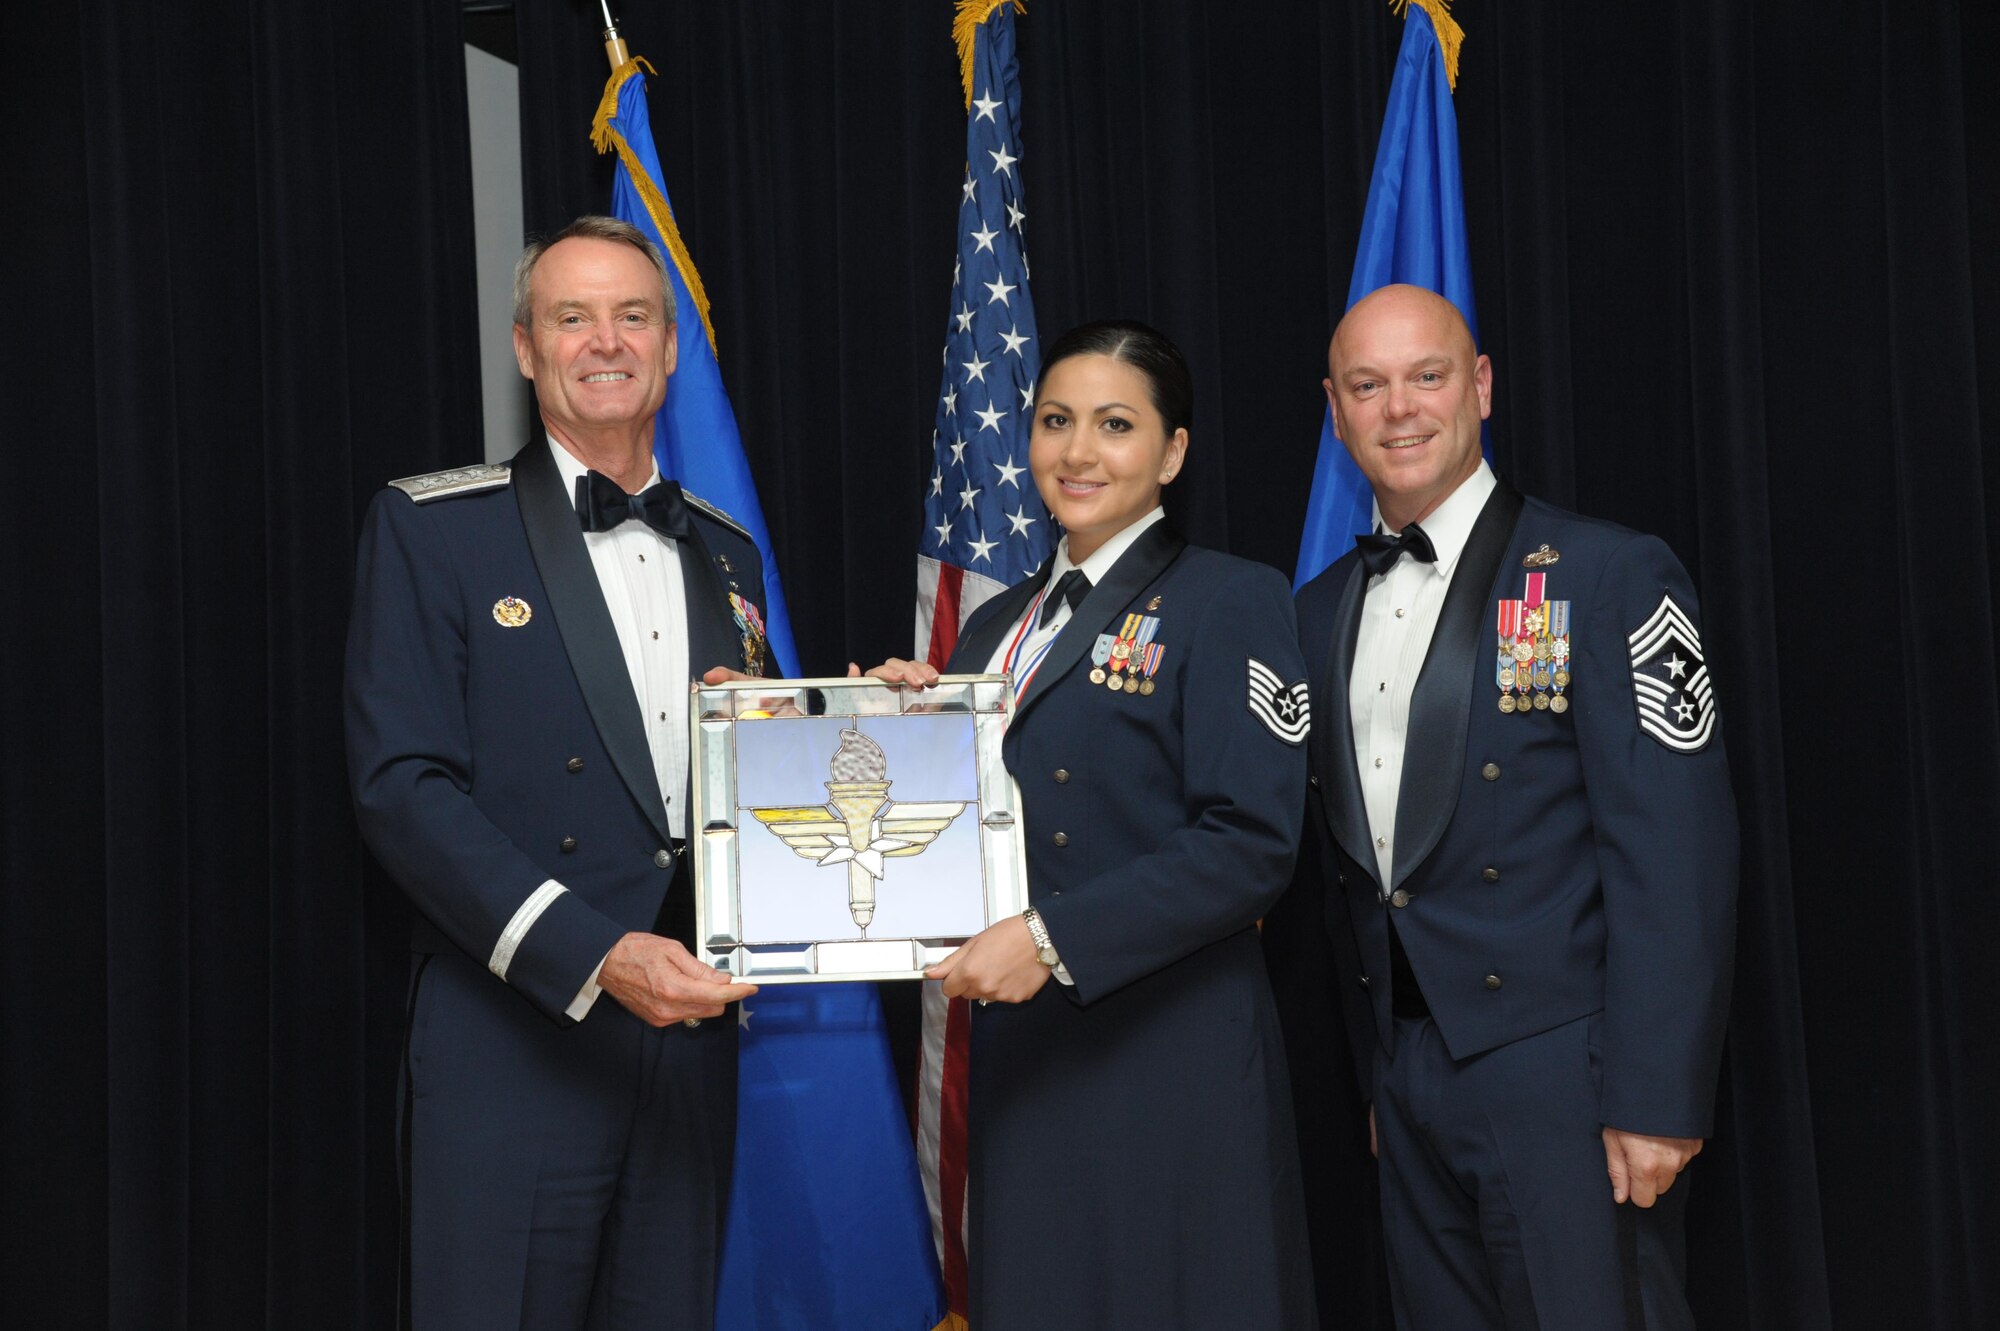 Tech. Sgt. Cassandra Cruz, 81st Force Support Squadron, Keesler Air Force Base, Mississippi, receives an award from Lt. Gen. Darryl Roberson, commander, Air Education and Training Command and AETC Command Chief Master Sgt. David Staton during a ceremony here, June 16. Cruz was selected as the AETC NCO of the Year. (U.S. Air Force photo by Joel Martinez)